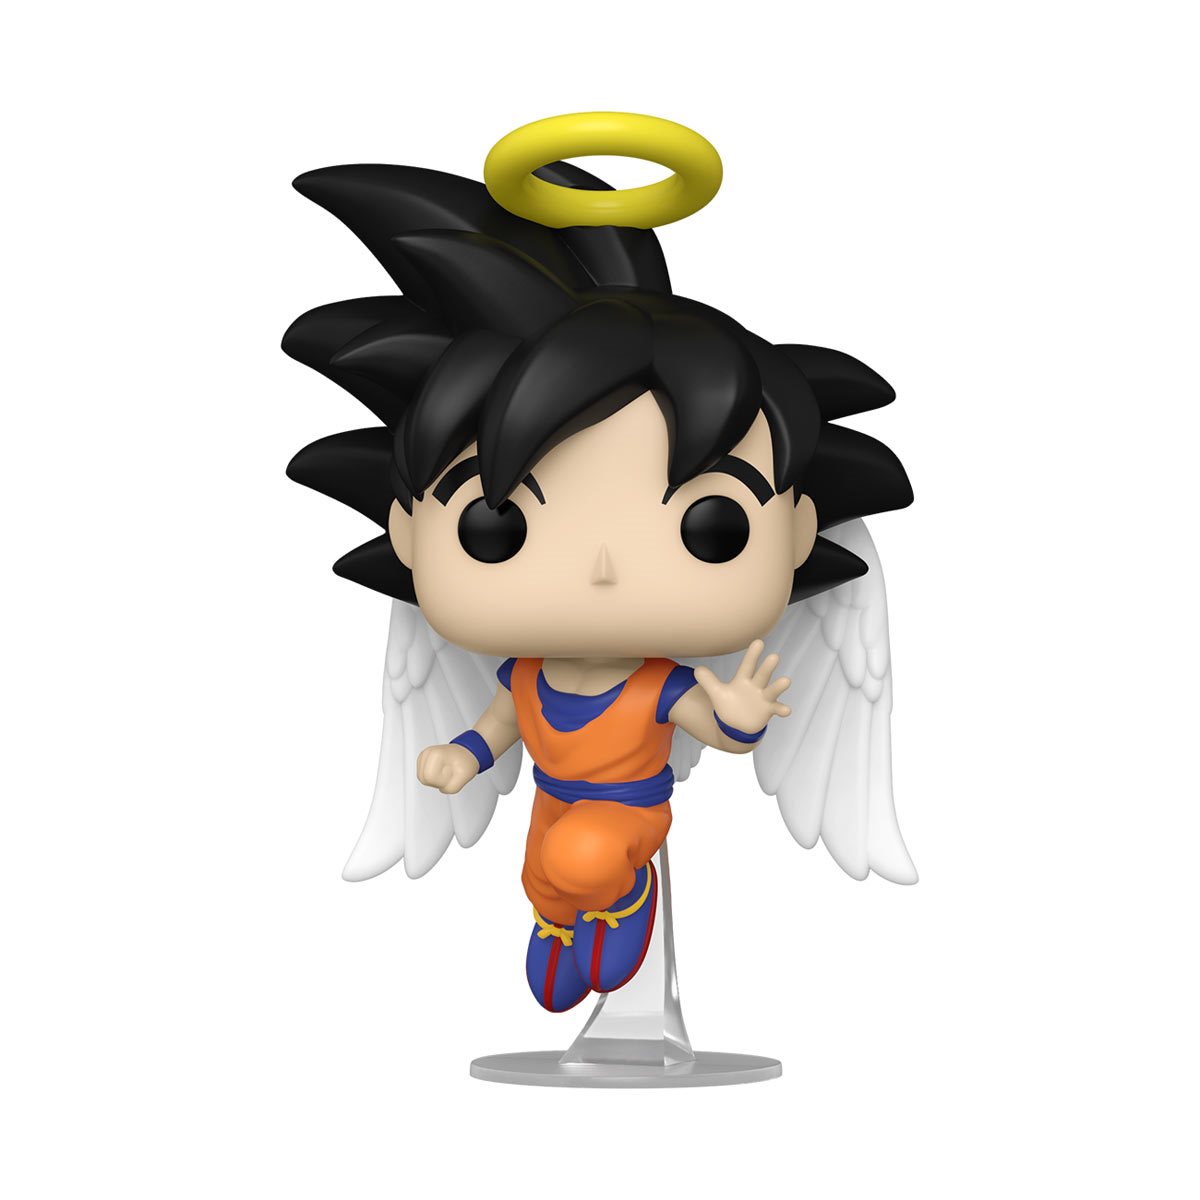 Dragon Ball Z Goku With Wings Funko Pop Vinyl Figure Previews Exclusive